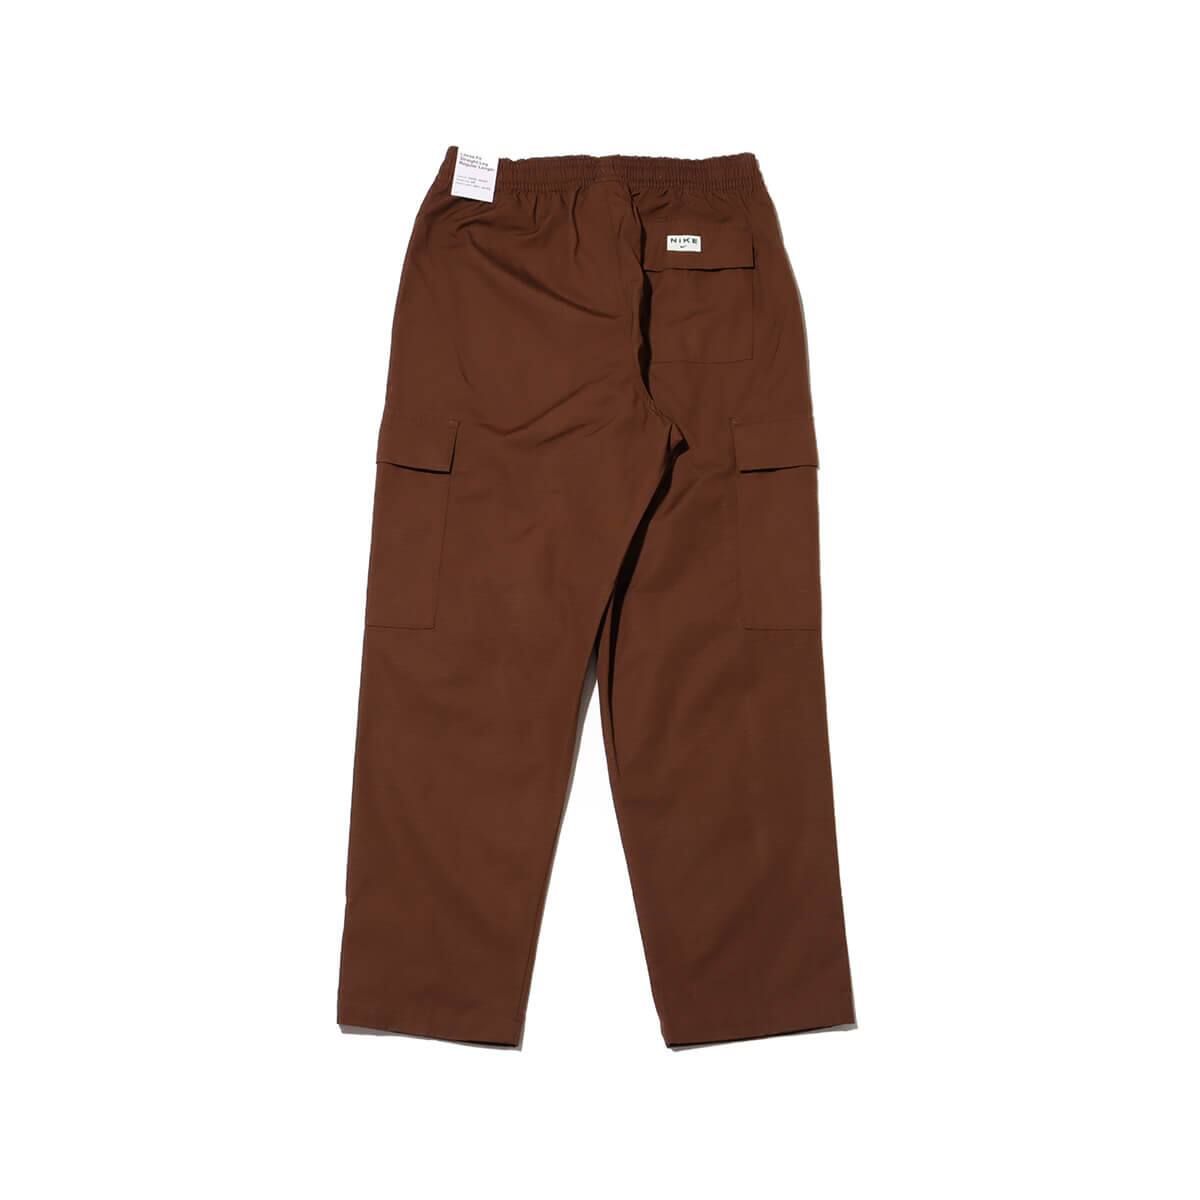 NIKE AS M NK CARGO WVN PANT NCPS CACAO WOW/SAIL/CACAO WOW 24SP-I